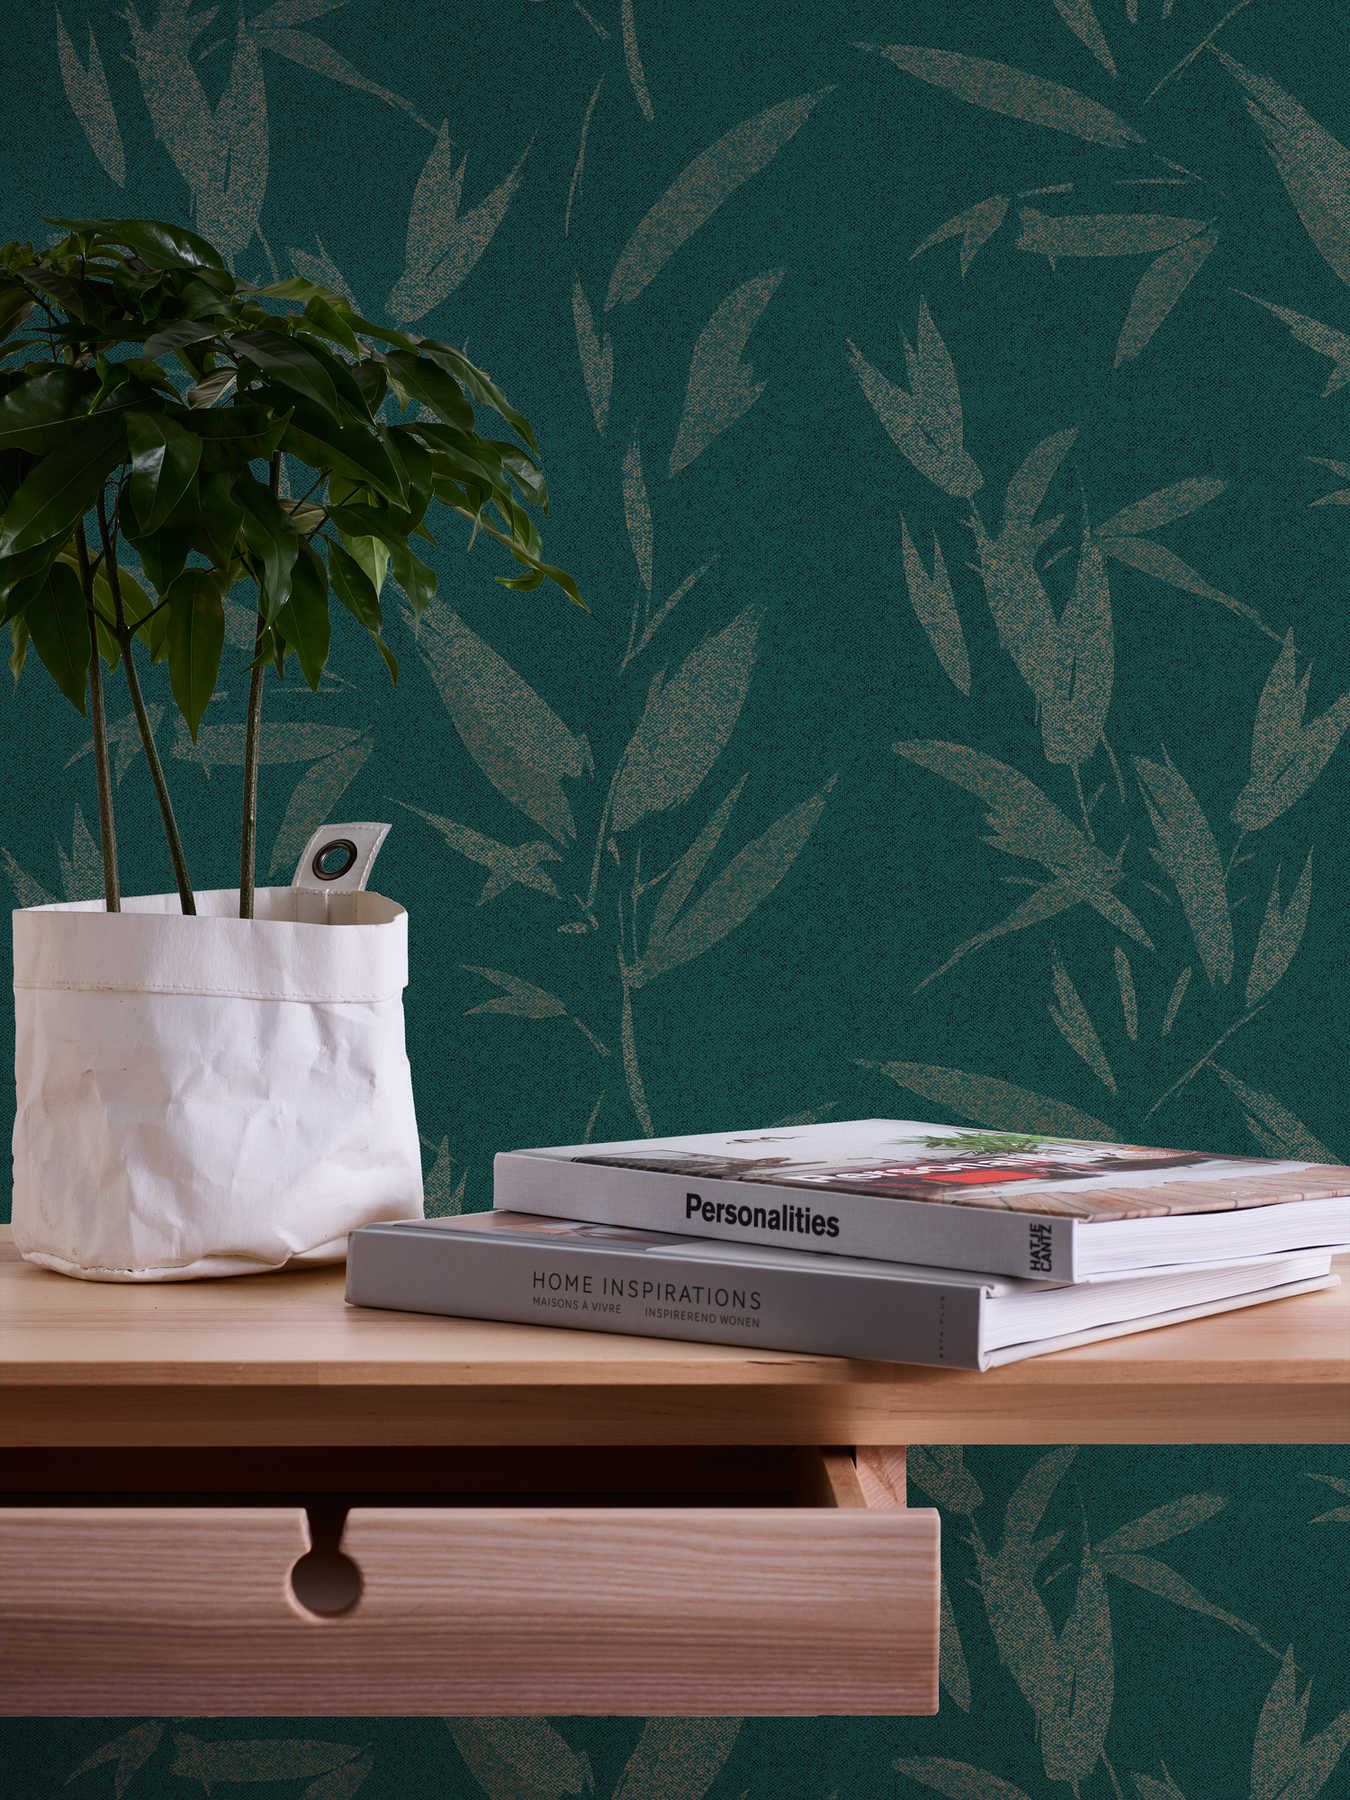             Leaves wallpaper abstract with textile look - green, beige
        